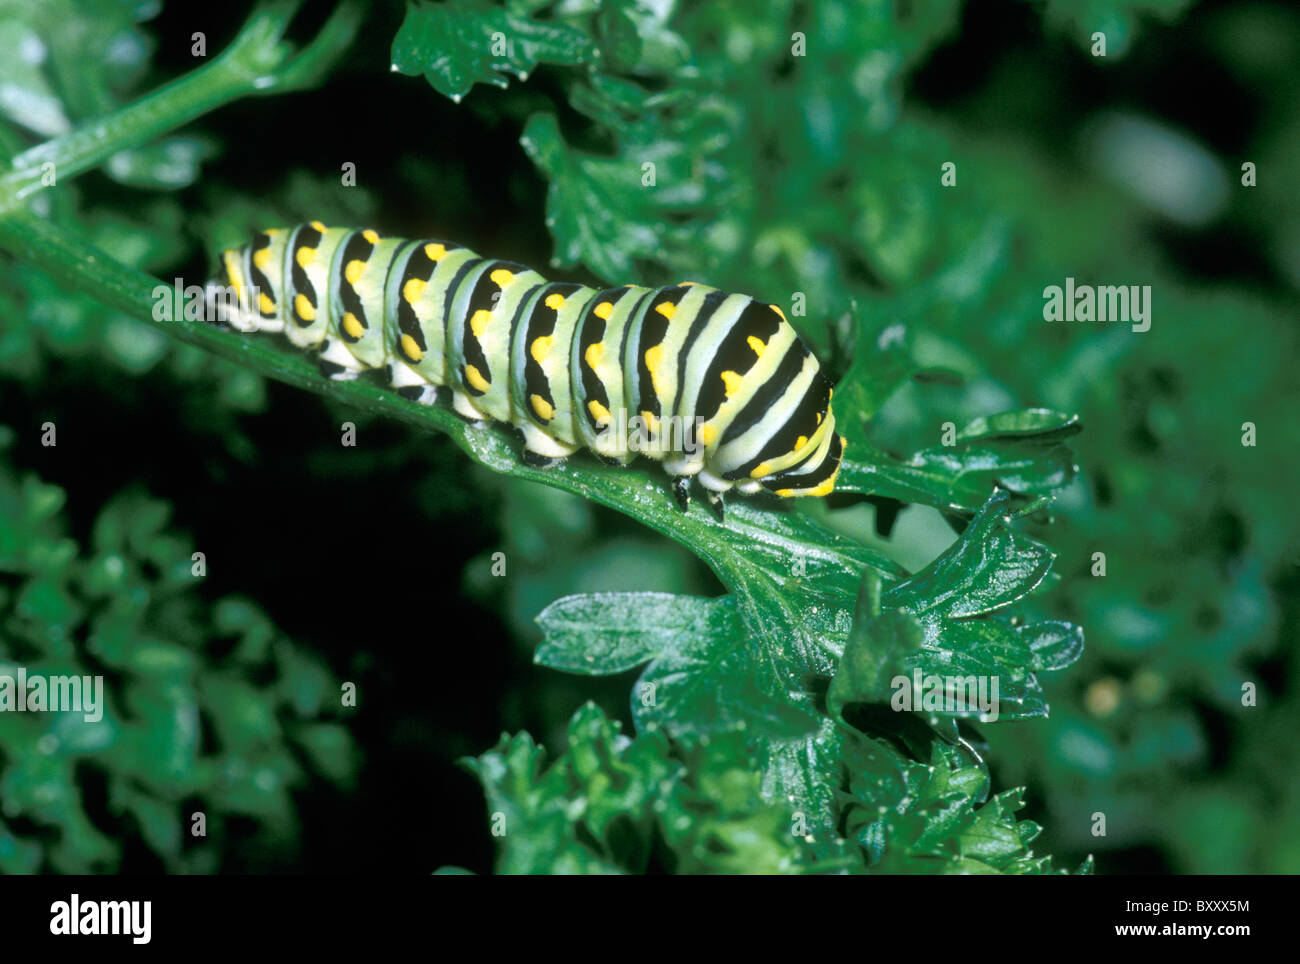 Caterpillar of eastern black swallowtail butterfly, eating fresh leafy parsley, Stock Photo